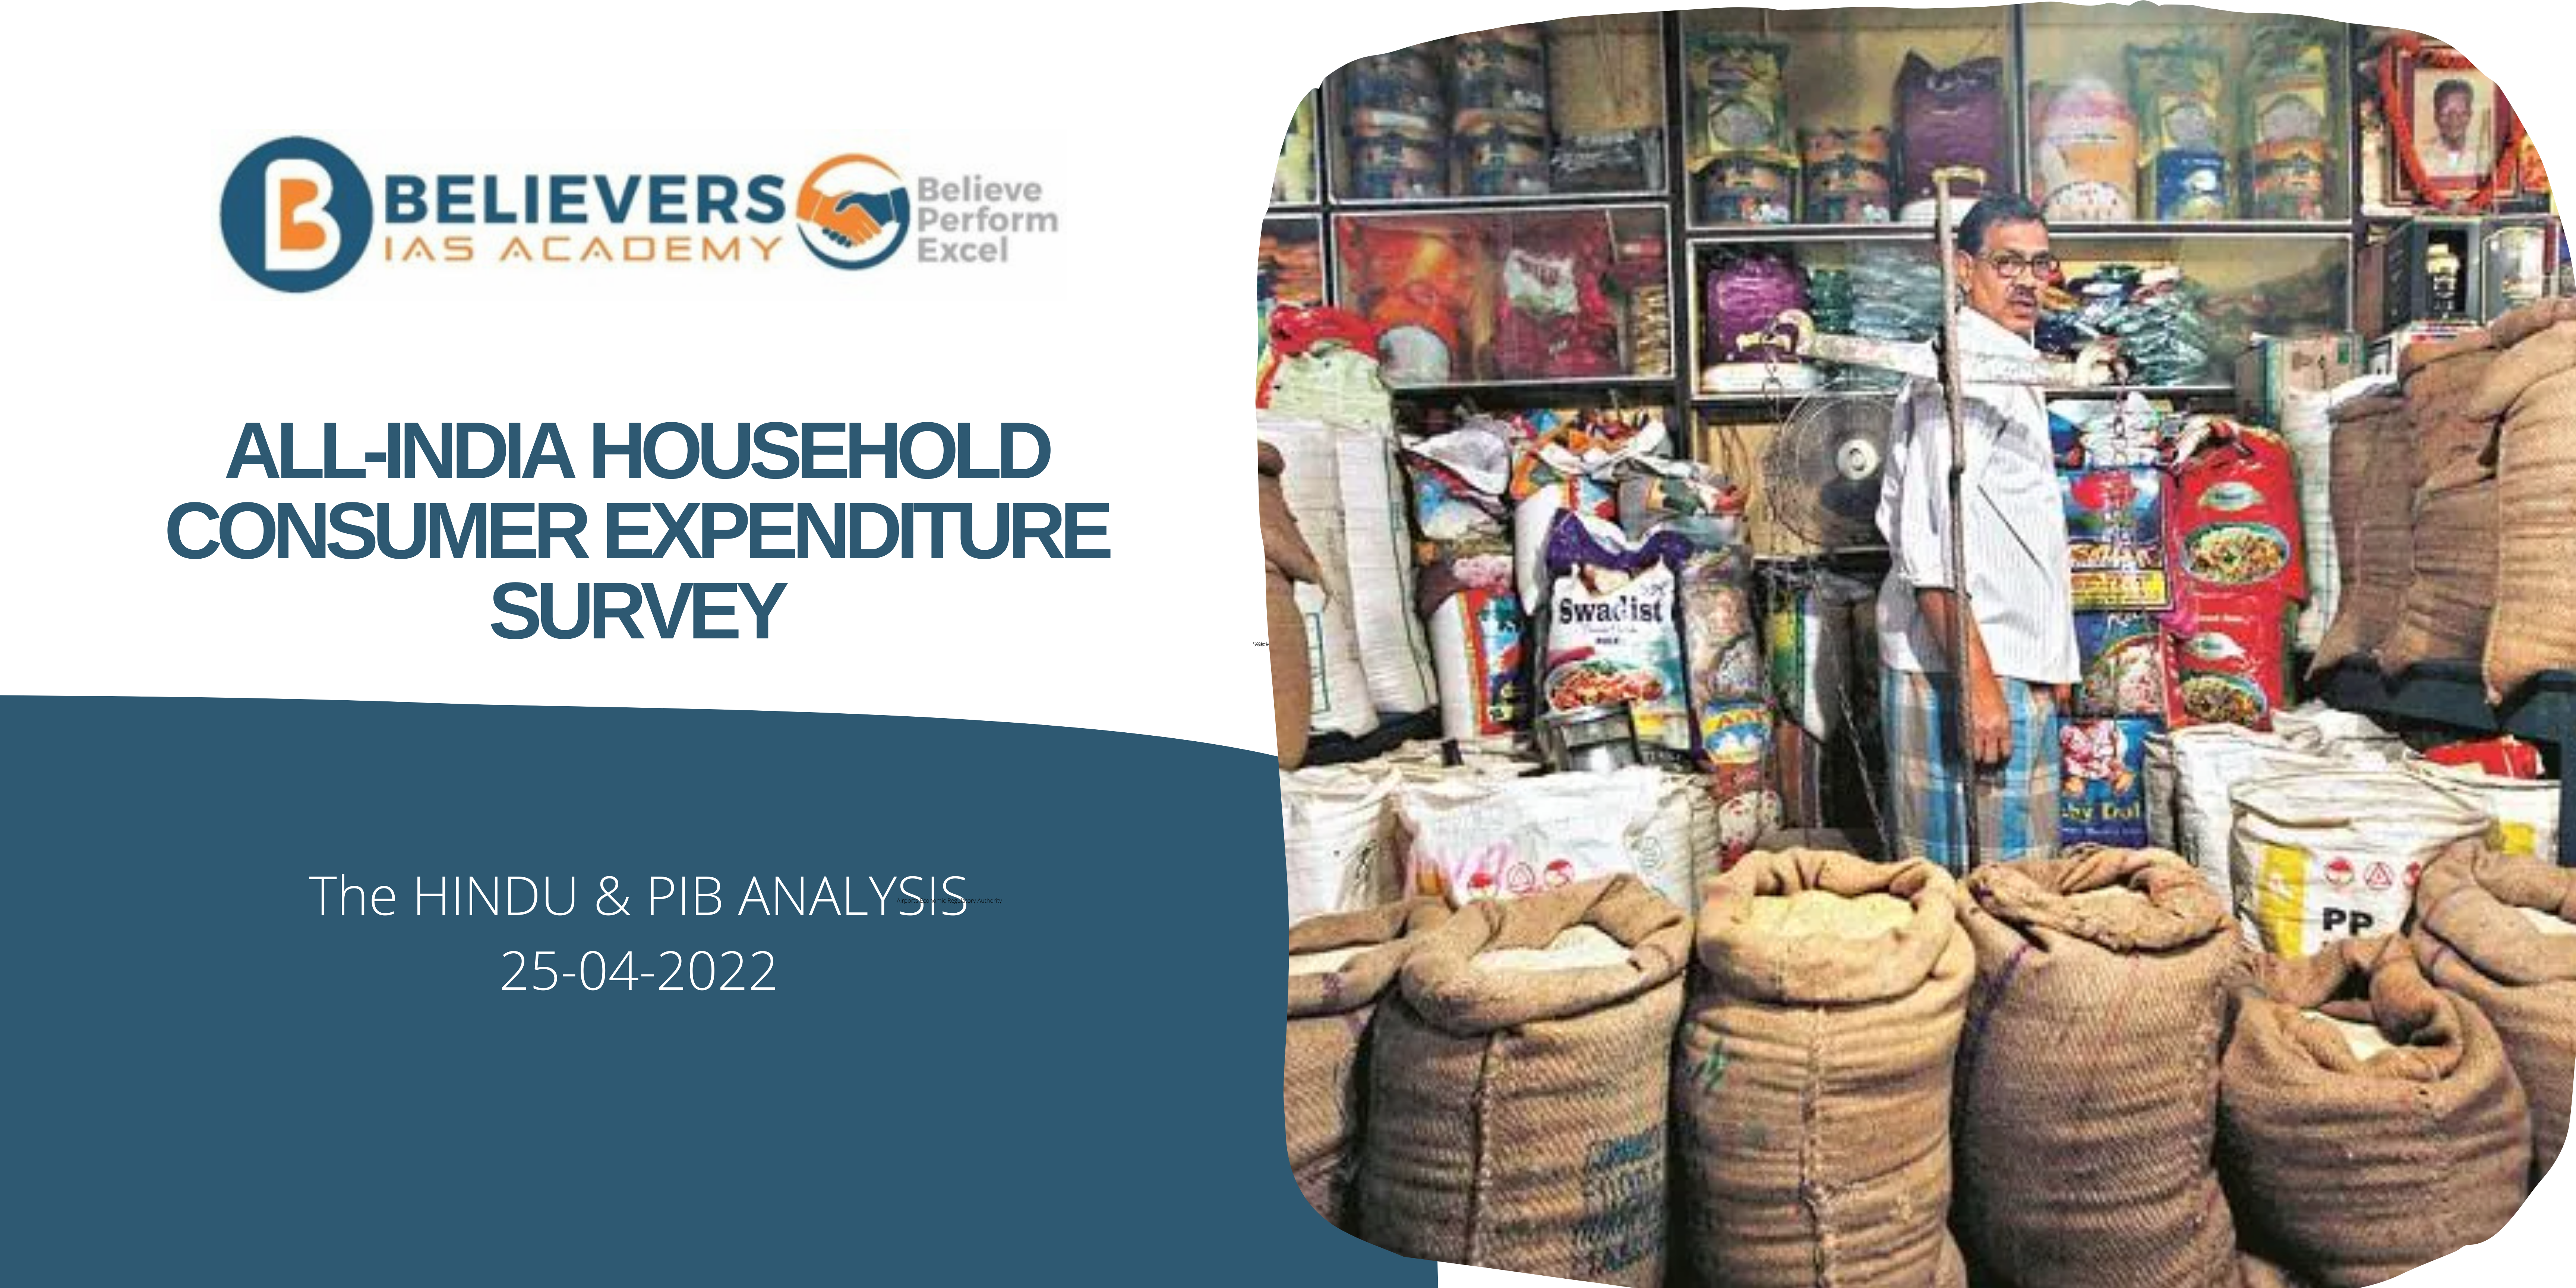 Civil services Current affairs - All-India Household Consumer Expenditure Survey